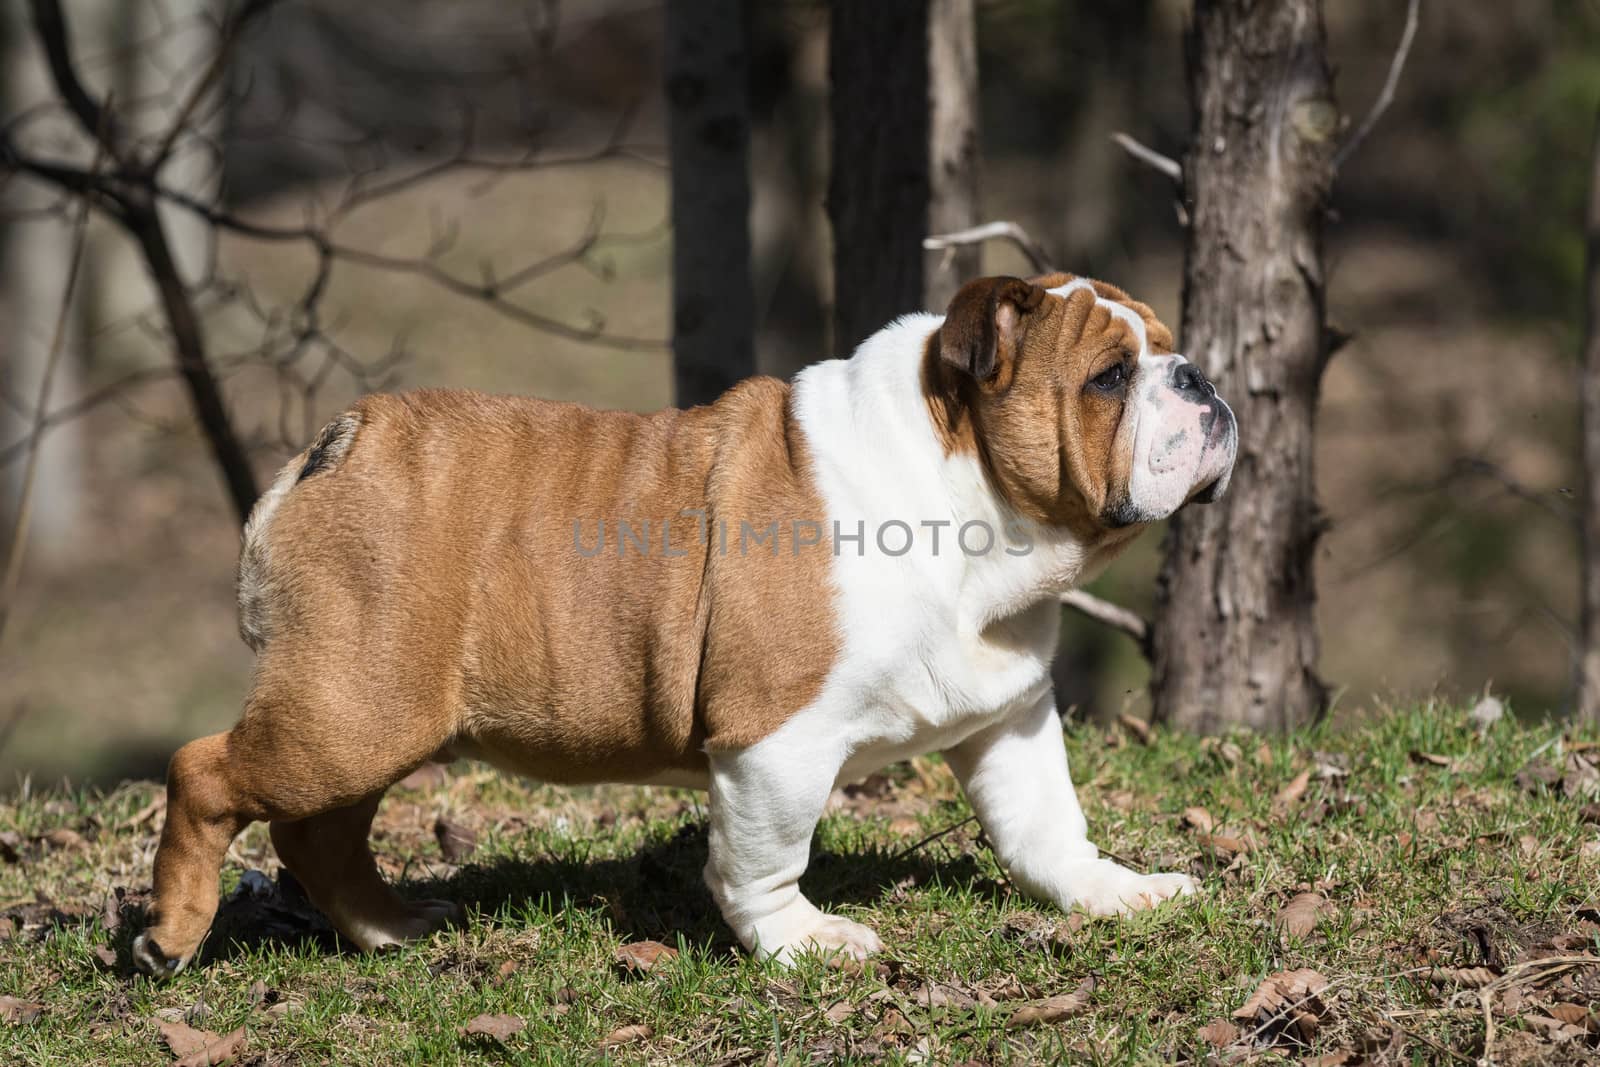 english bulldog puppy walking outside in the grass